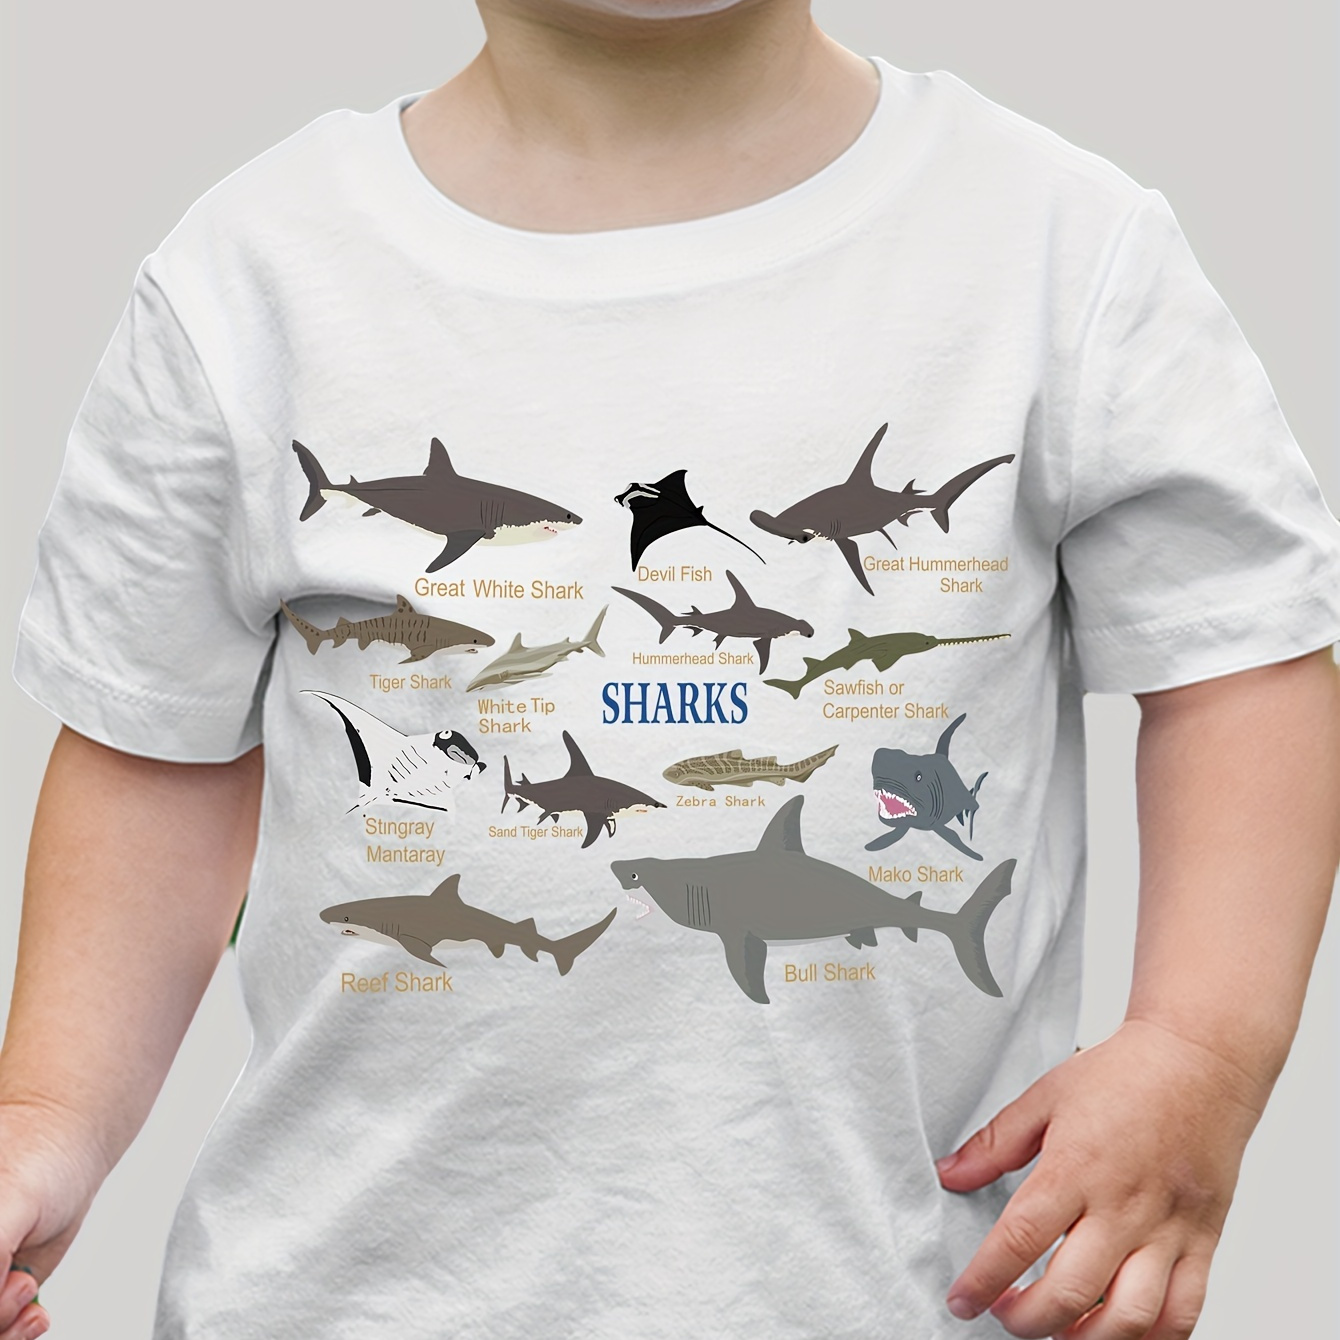 

100% Cotton Letters Print Cartoon Sharks Graphic Short Sleeve Crew Neck T-shirt, Casual Breathable Tee Tops Summer Gift, Boys' Clothing